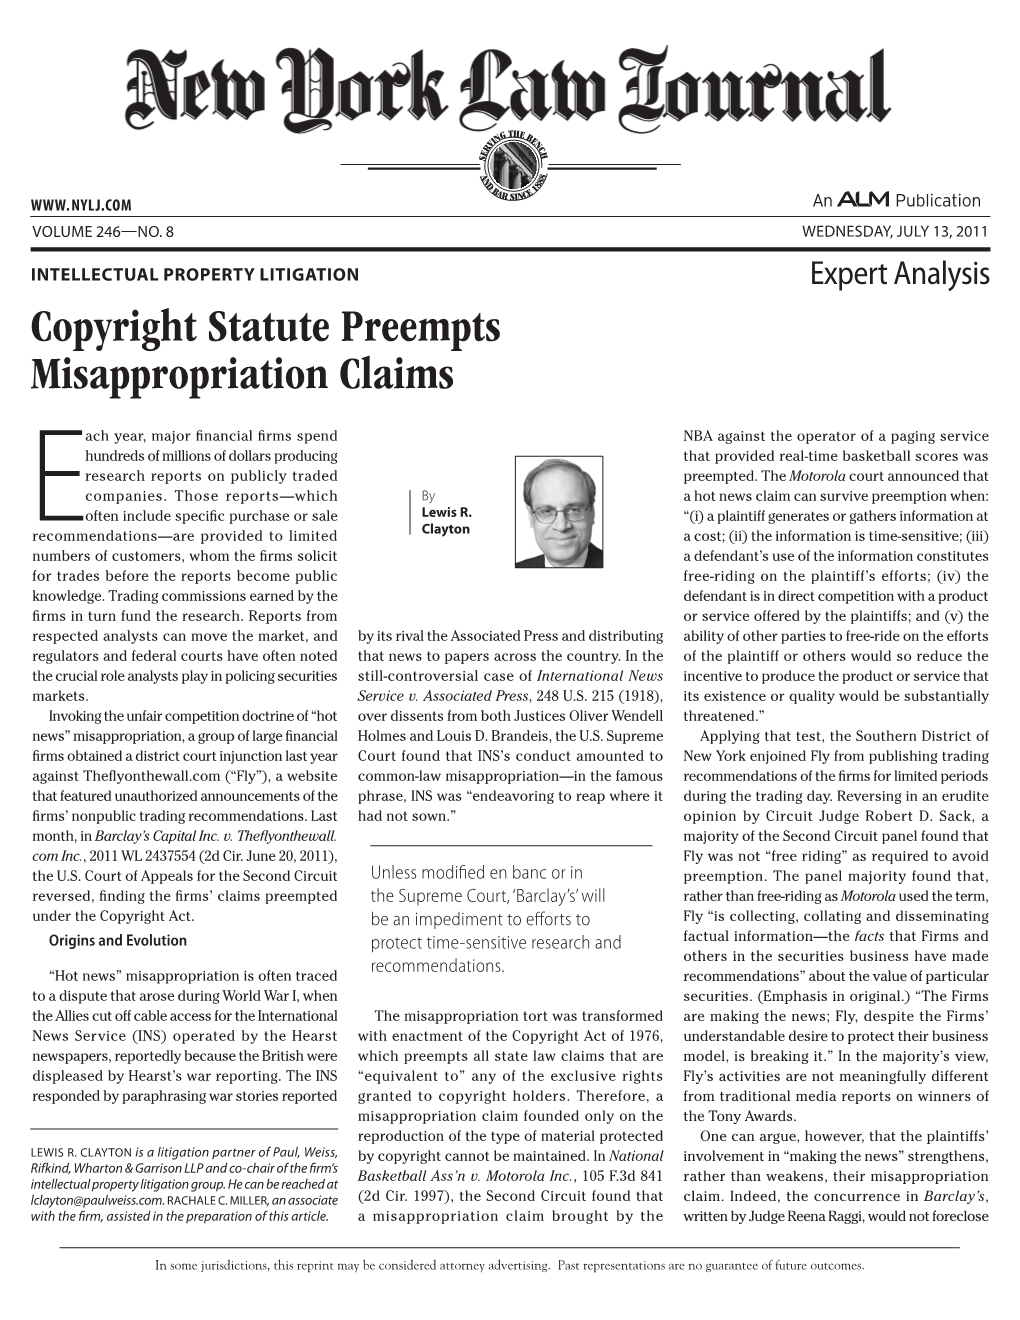 Copyright Statute Preempts Misappropriation Claims